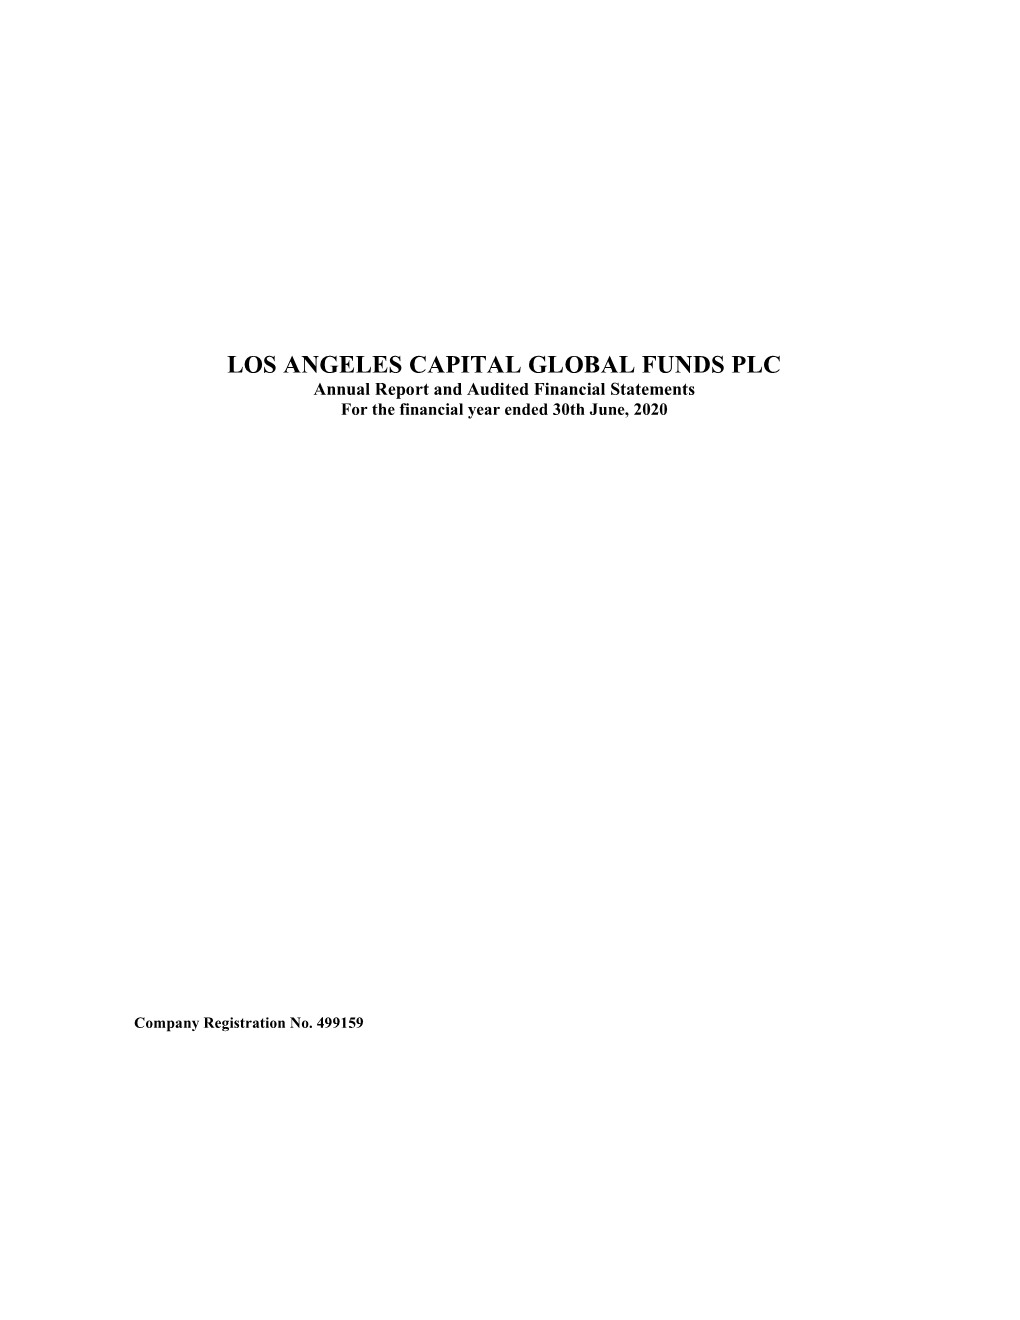 LOS ANGELES CAPITAL GLOBAL FUNDS PLC Annual Report and Audited Financial Statements for the Financial Year Ended 30Th June, 2020